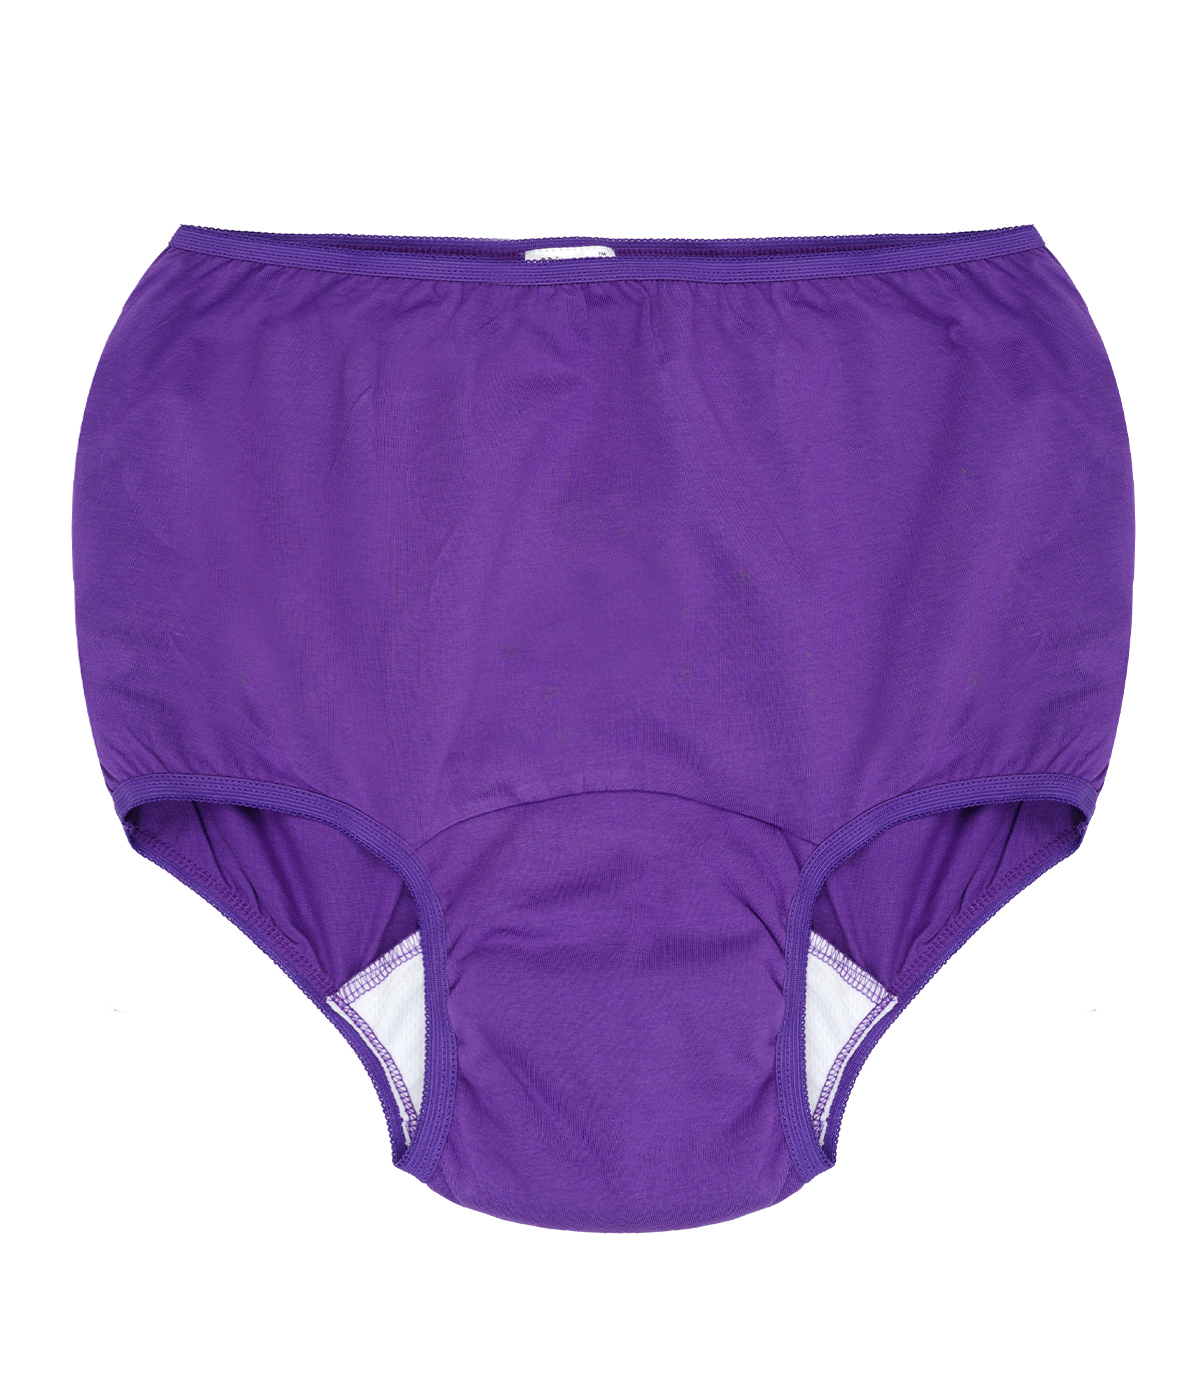 Pee-Proof Underwear for Women  Absorbent incontinence panites